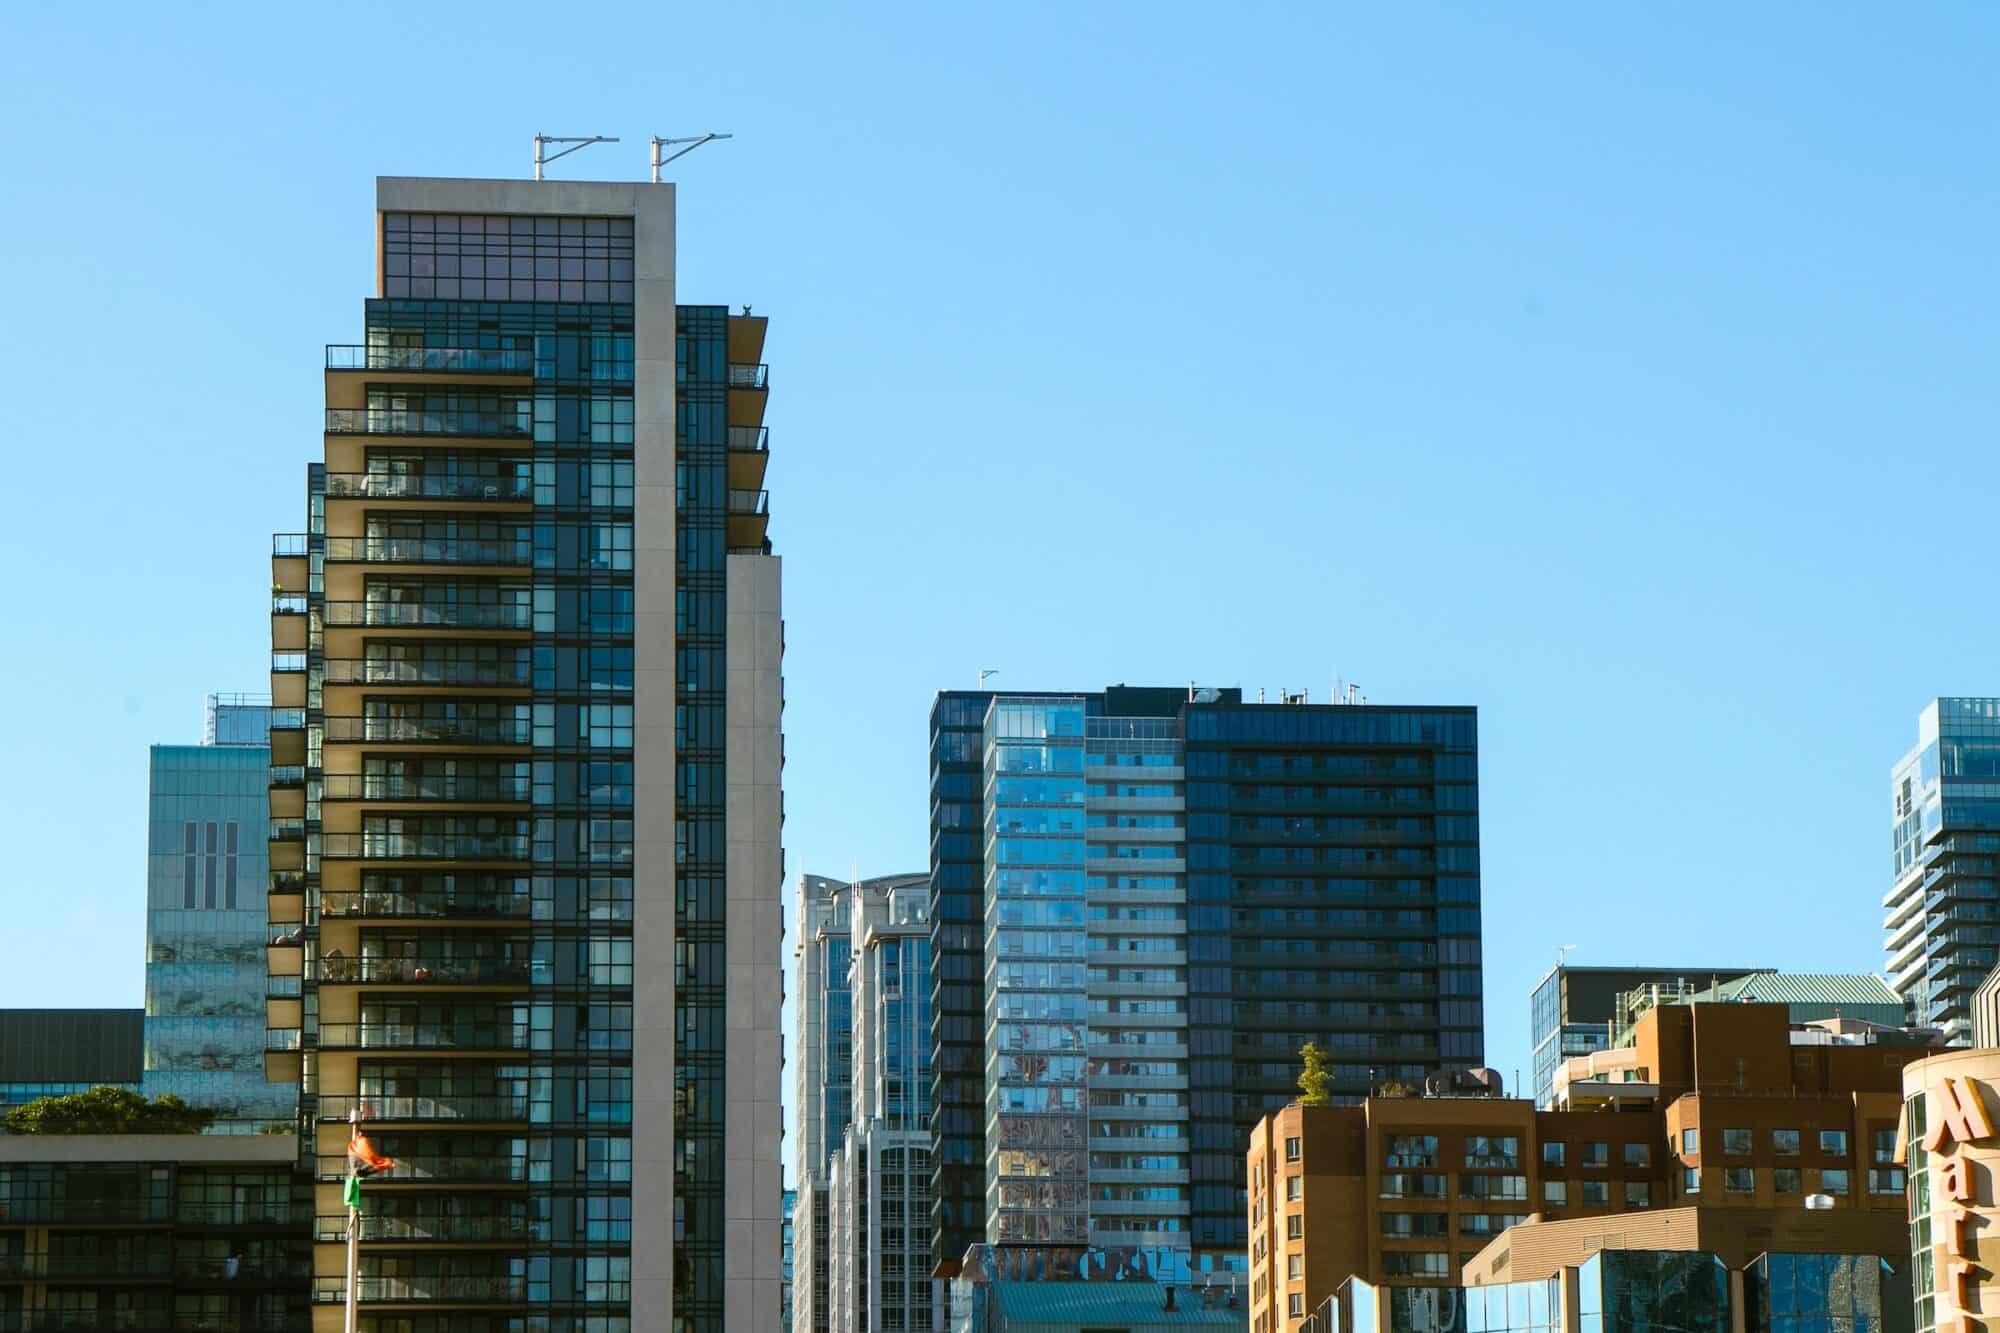 A skyline of different condo and apartment buildings in downtown Toronto, ON.